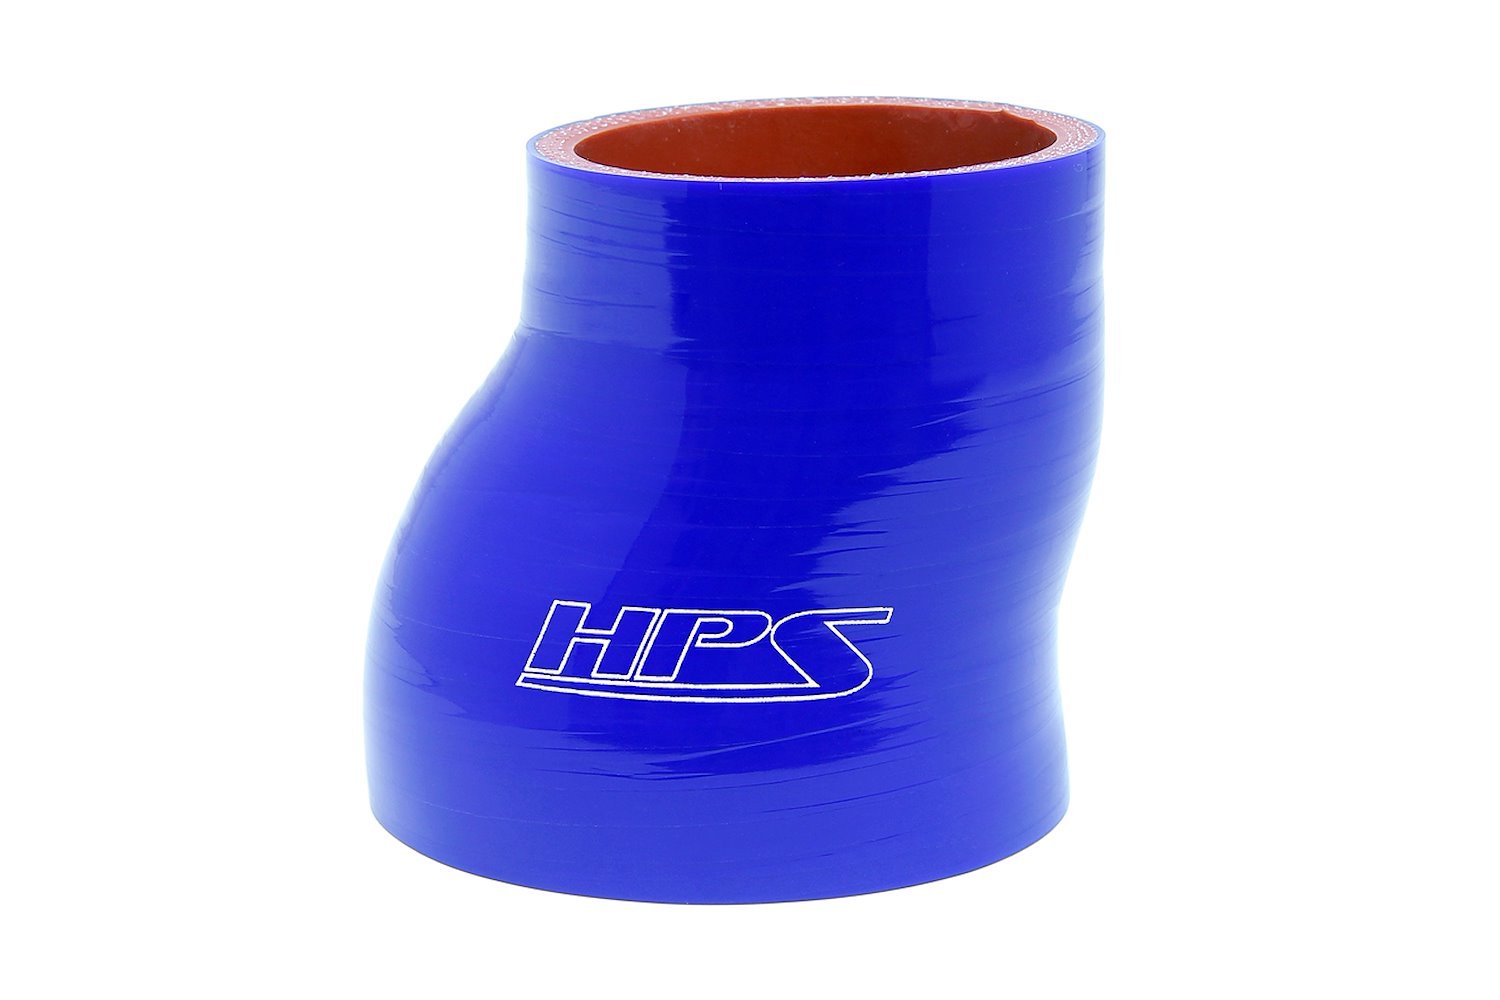 HTSOR-300-325-BLUE Offset Reducer, High-Temp 4-Ply Reinforced, 3 in. ID To 3 1/4 in. ID, 3 in. Length.